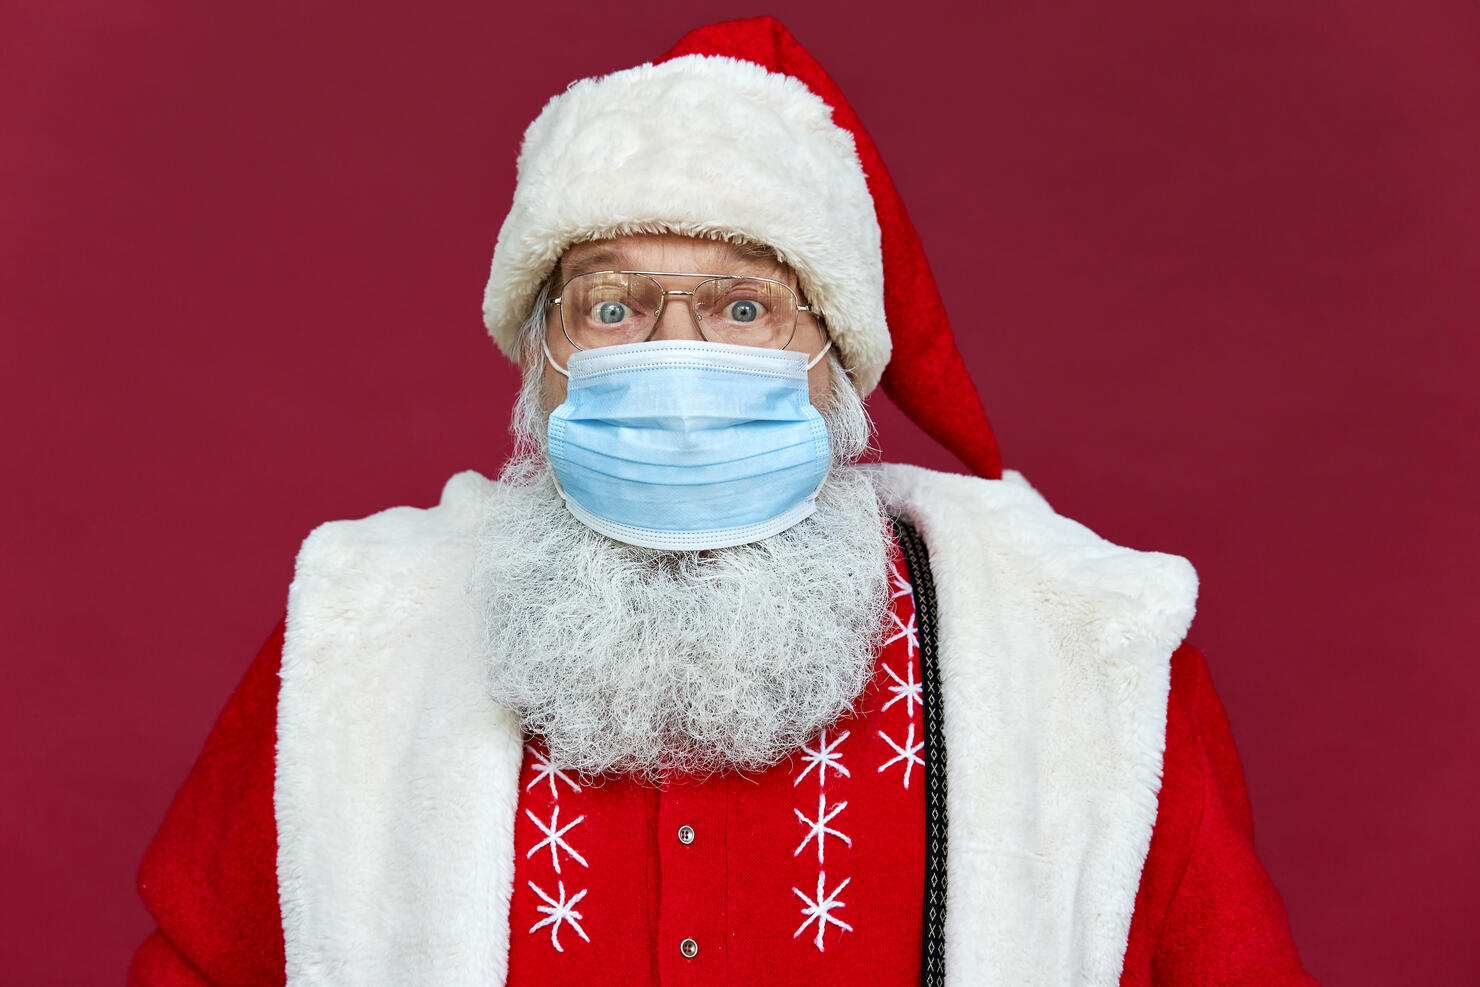 Close up portrait of funny old bearded surprised Santa Claus wearing costume, glasses, face mask looking at camera standing on Christmas red background. Covid 19 coronavirus safety protection concept.